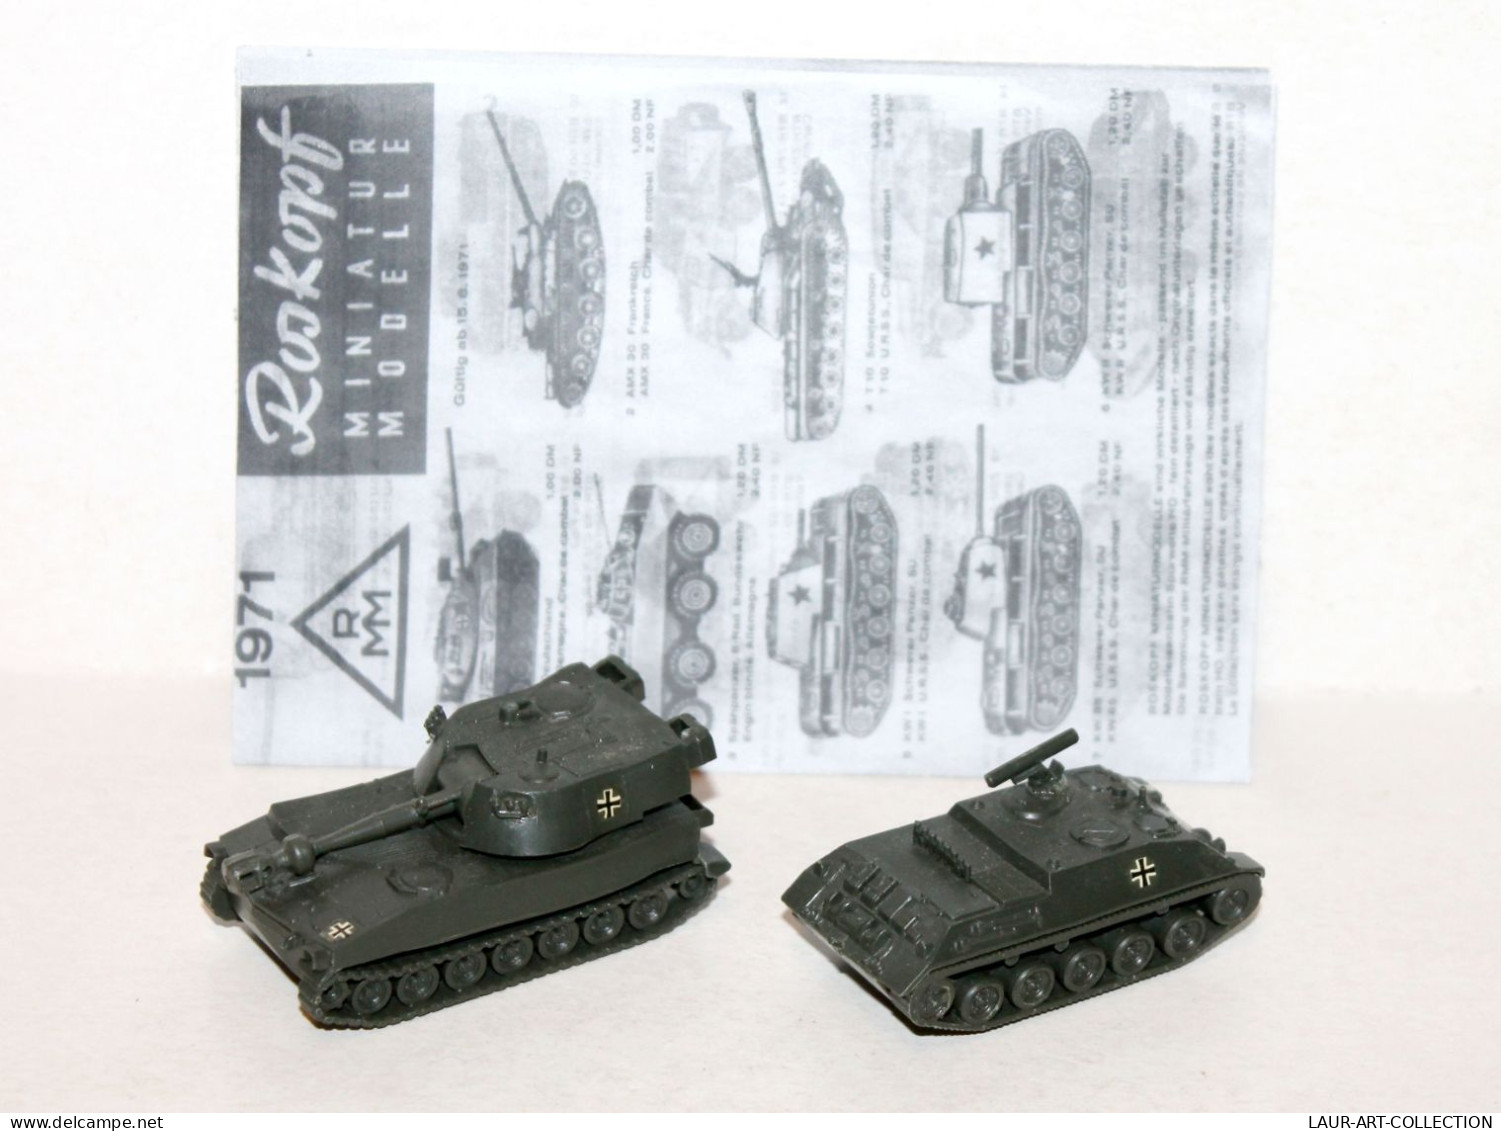 ROSKOPF CHASSEUR CHAR MISSILE SS11 ALLEMAND + M 109G TANK OBUSIER AUTOMOTEUR USA, MODELE REDUIT MILITARIA (1712.61) - Tanques